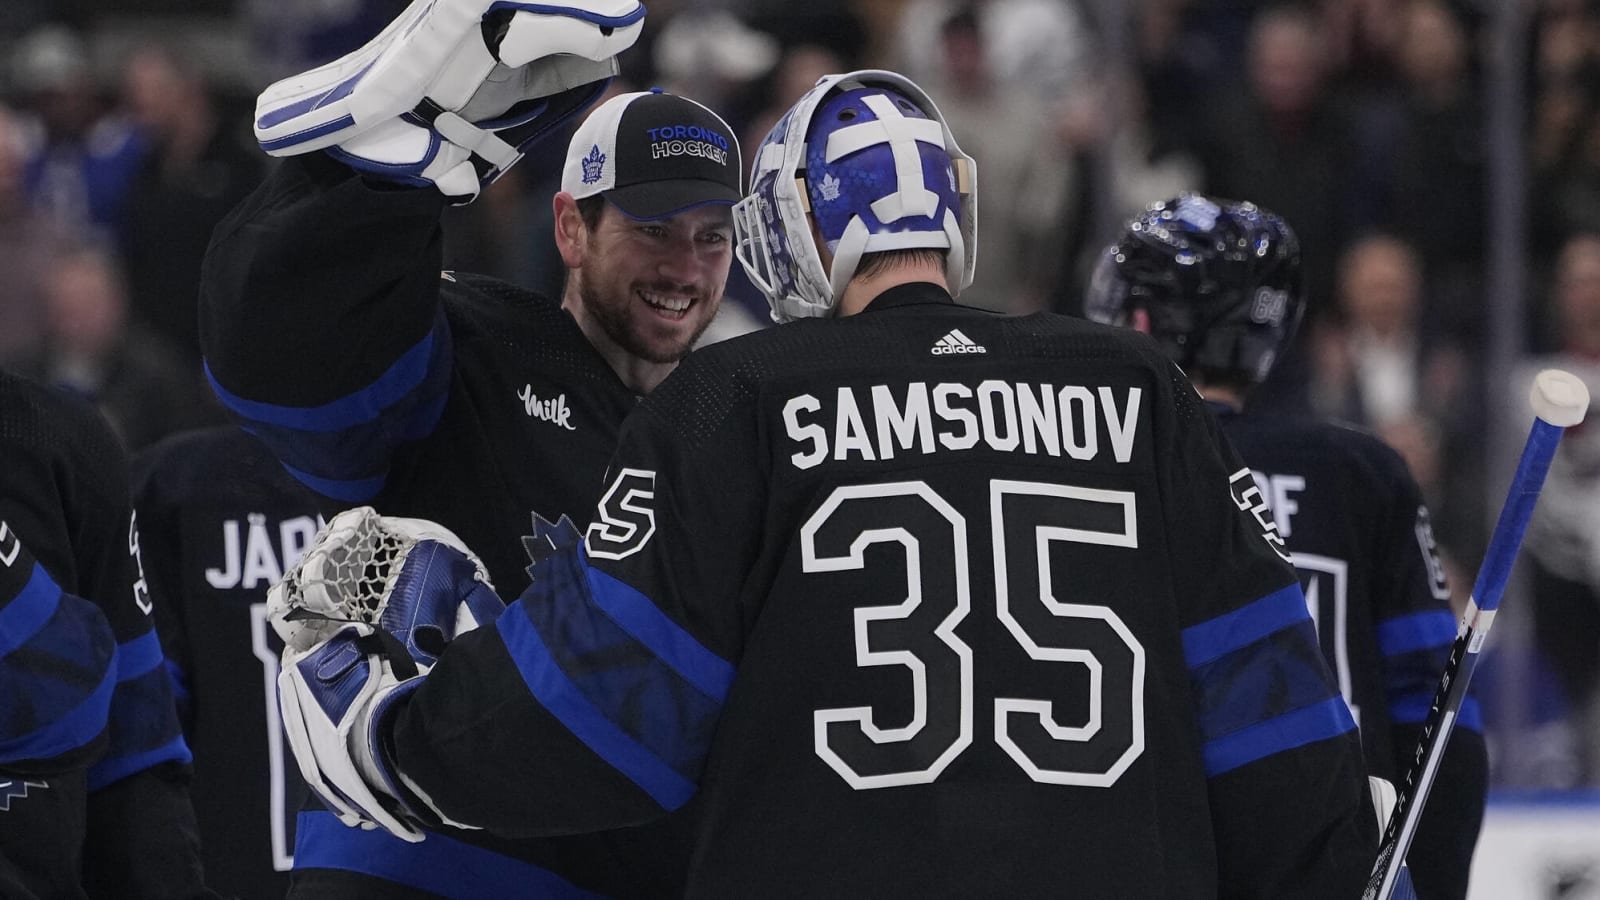 ‘It’s unbelievable. I almost cried’: Maple Leafs’ Ilya Samsonov after shutout over Jets